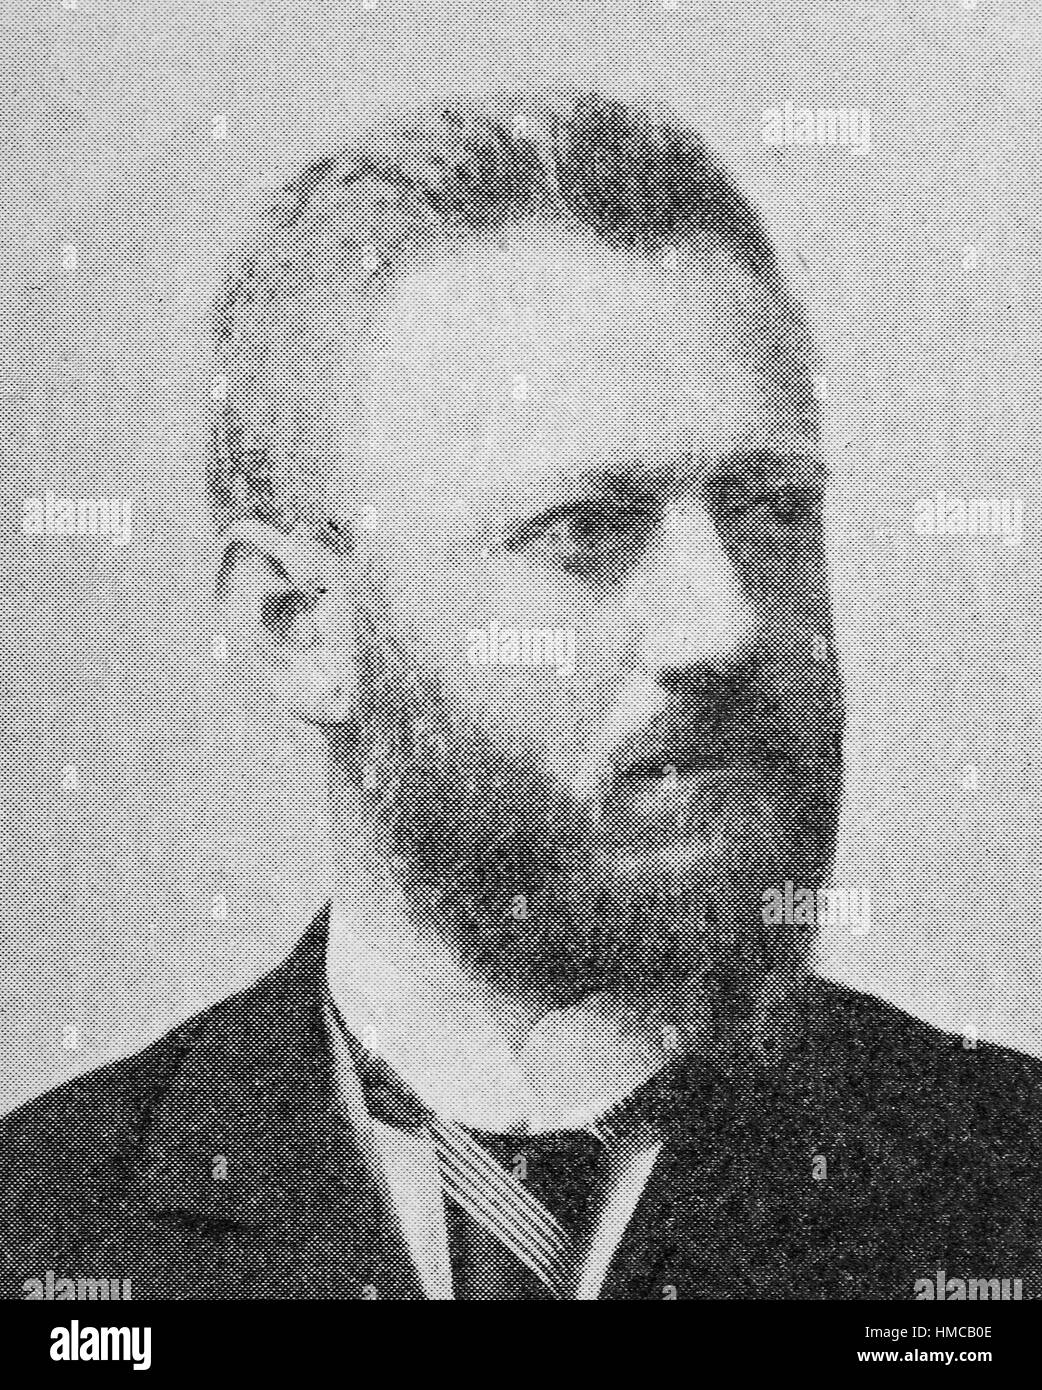 Otto Behaghel, May 3, 1854 in Karlsruhe - October 9, 1936 in Munich, was a germanist and professor in Heidelberg, Basel, and Giessen, photo or illustration, published 1892, digital improved Stock Photo